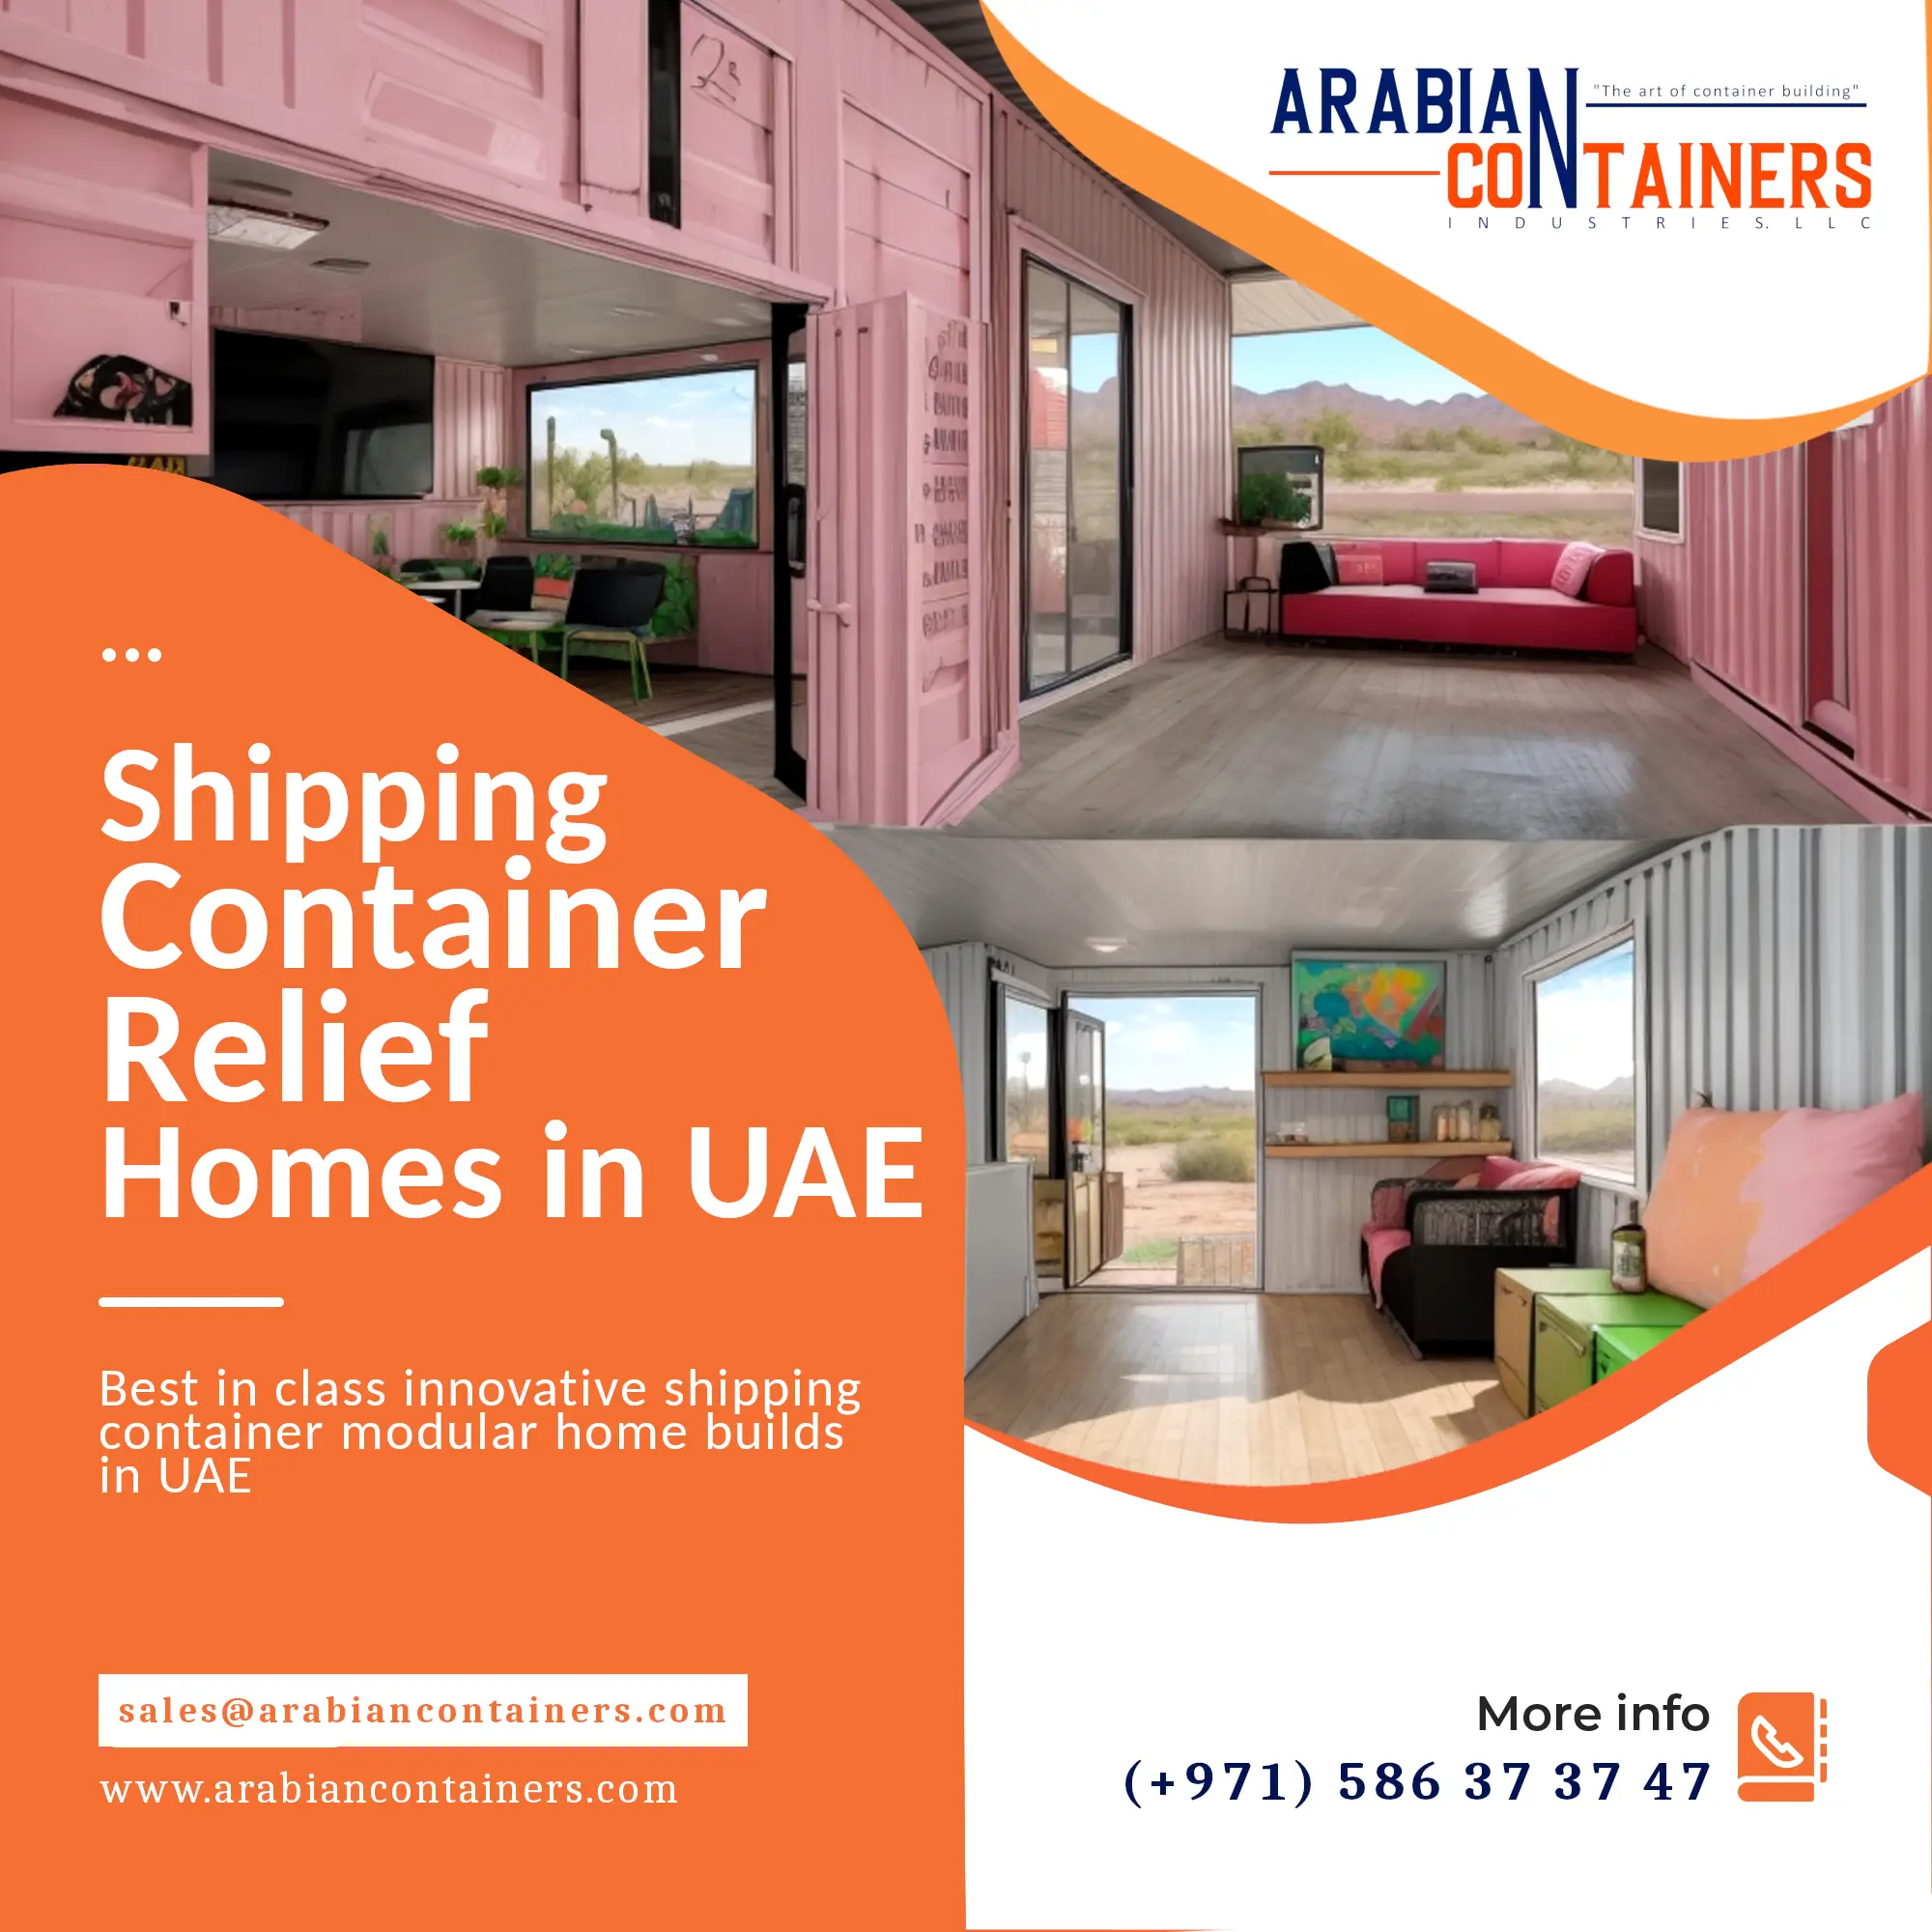 Shipping Containers for Disaster Relief and Humanitarian Aid